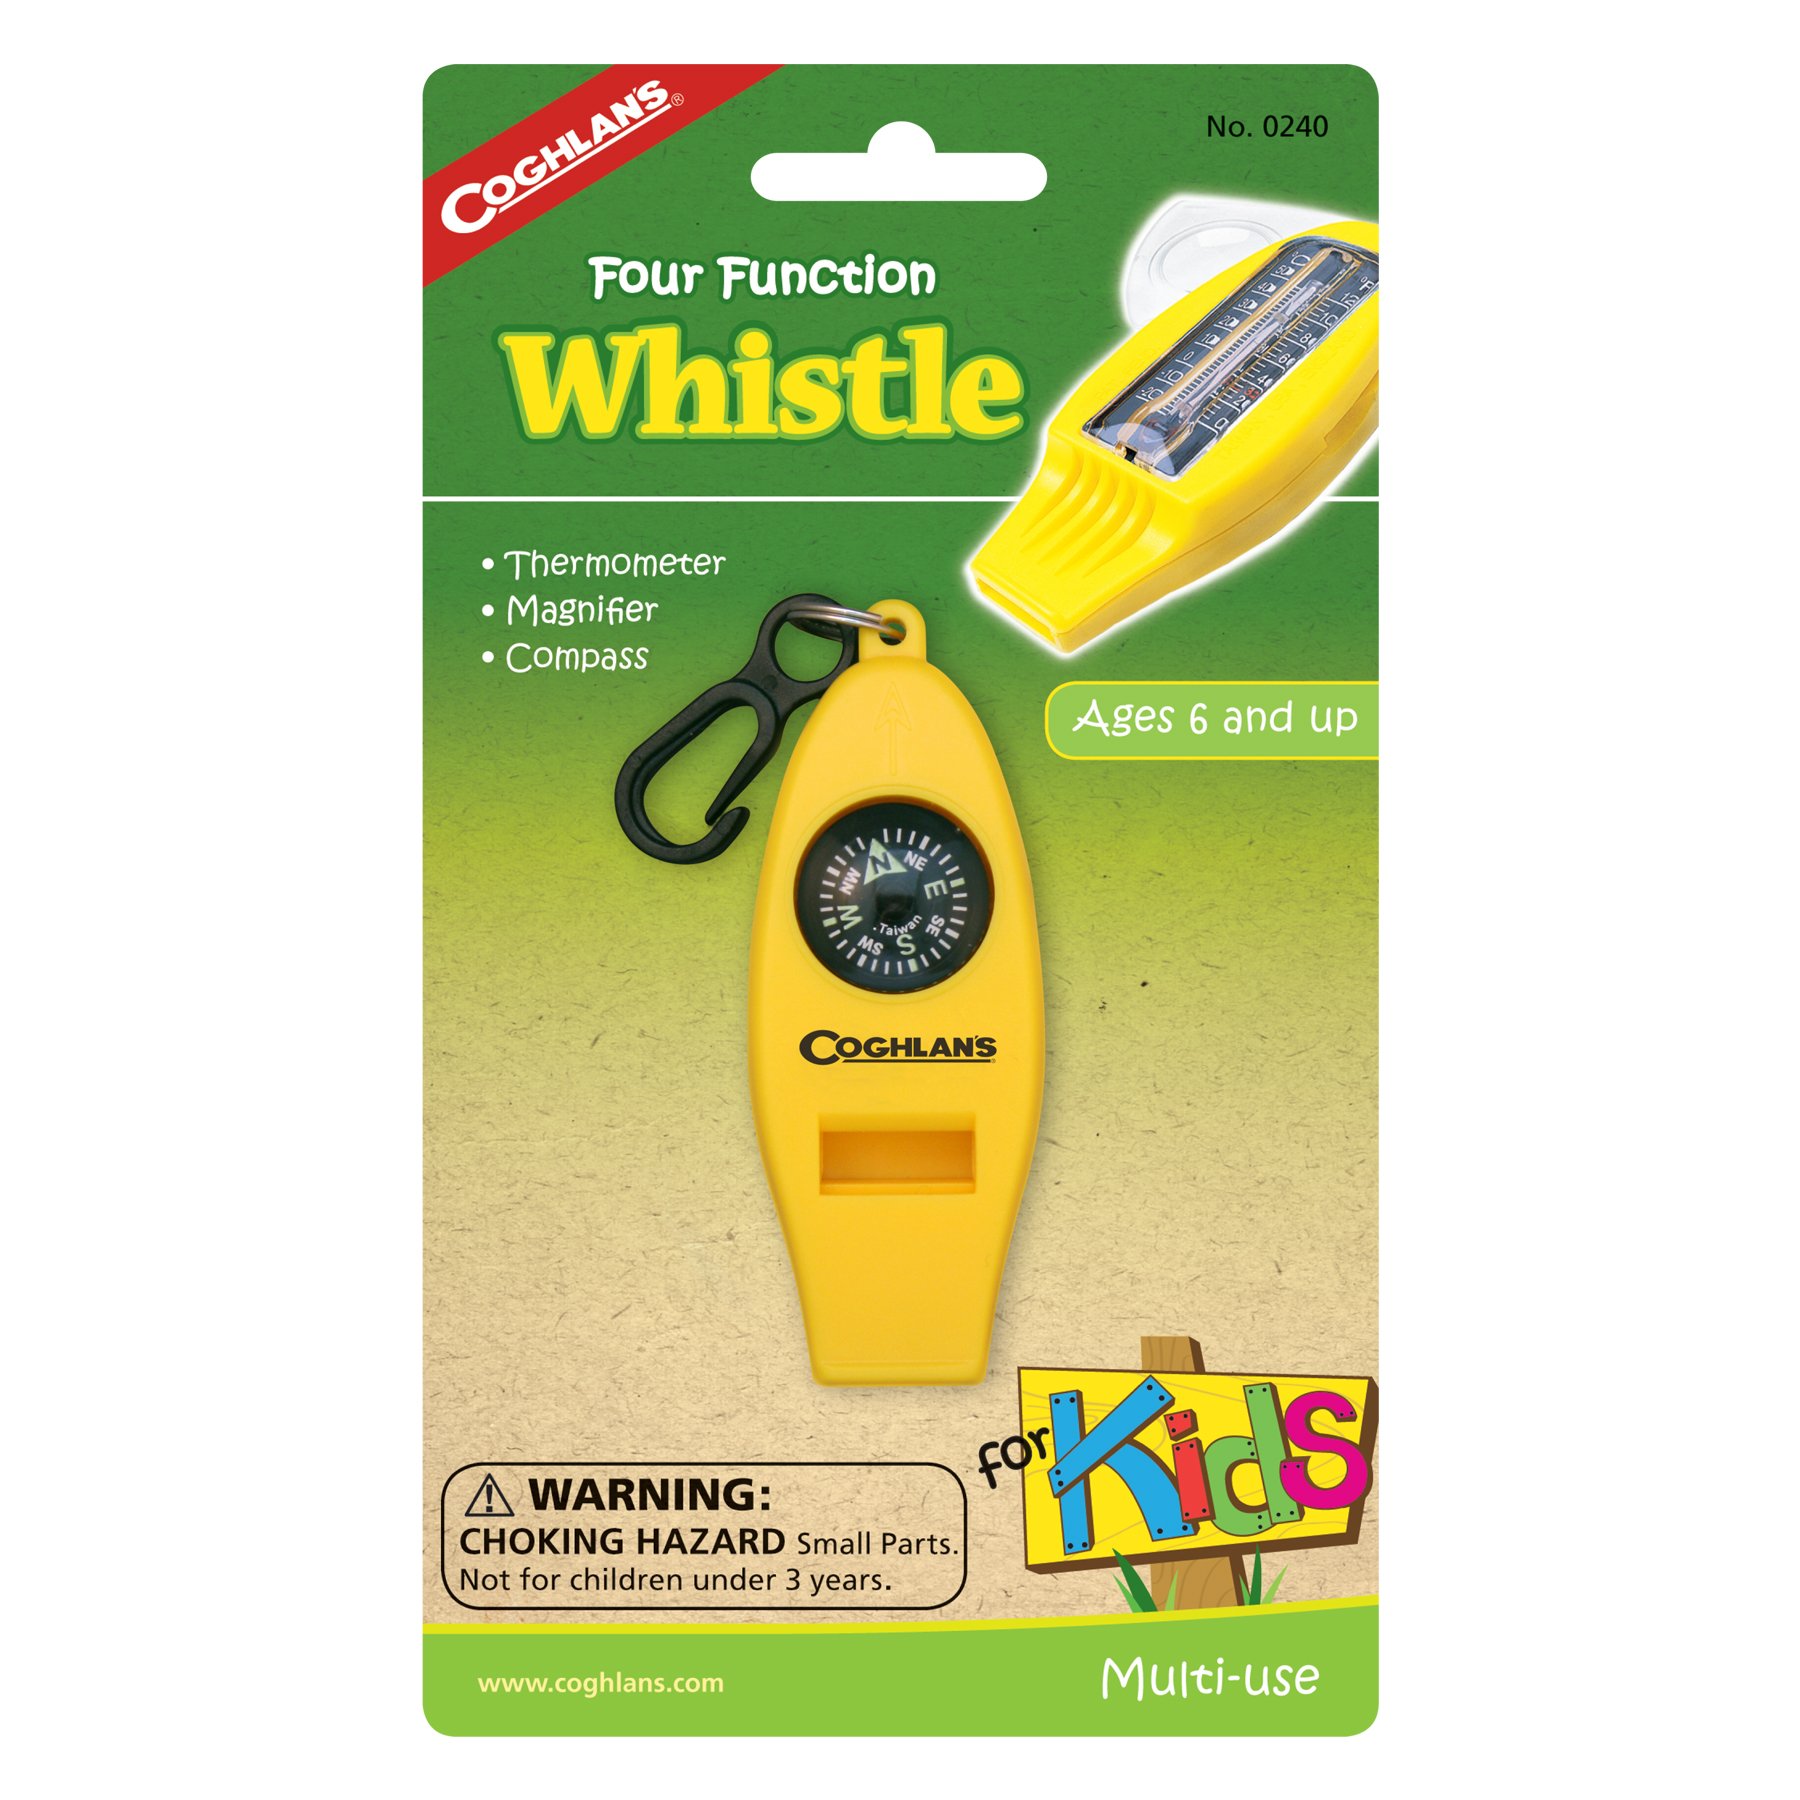 WHISTLE,4 FUNCTION F/KIDS